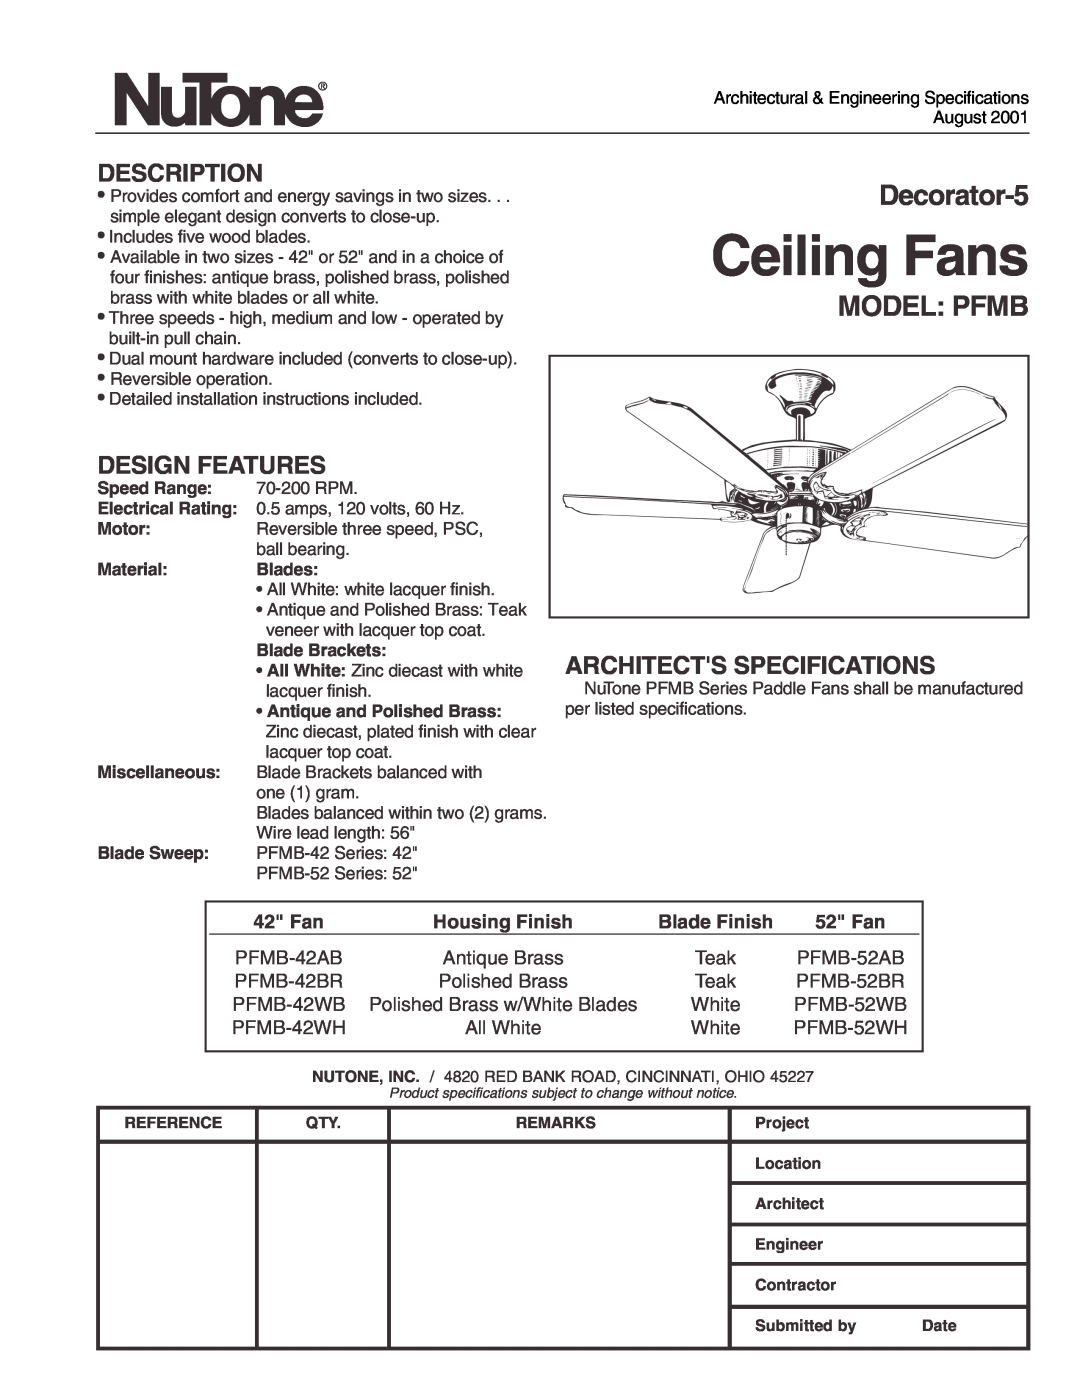 NuTone PFMB specifications Ceiling Fans, Decorator-5, Model Pfmb, Description, Design Features, Architects Specifications 